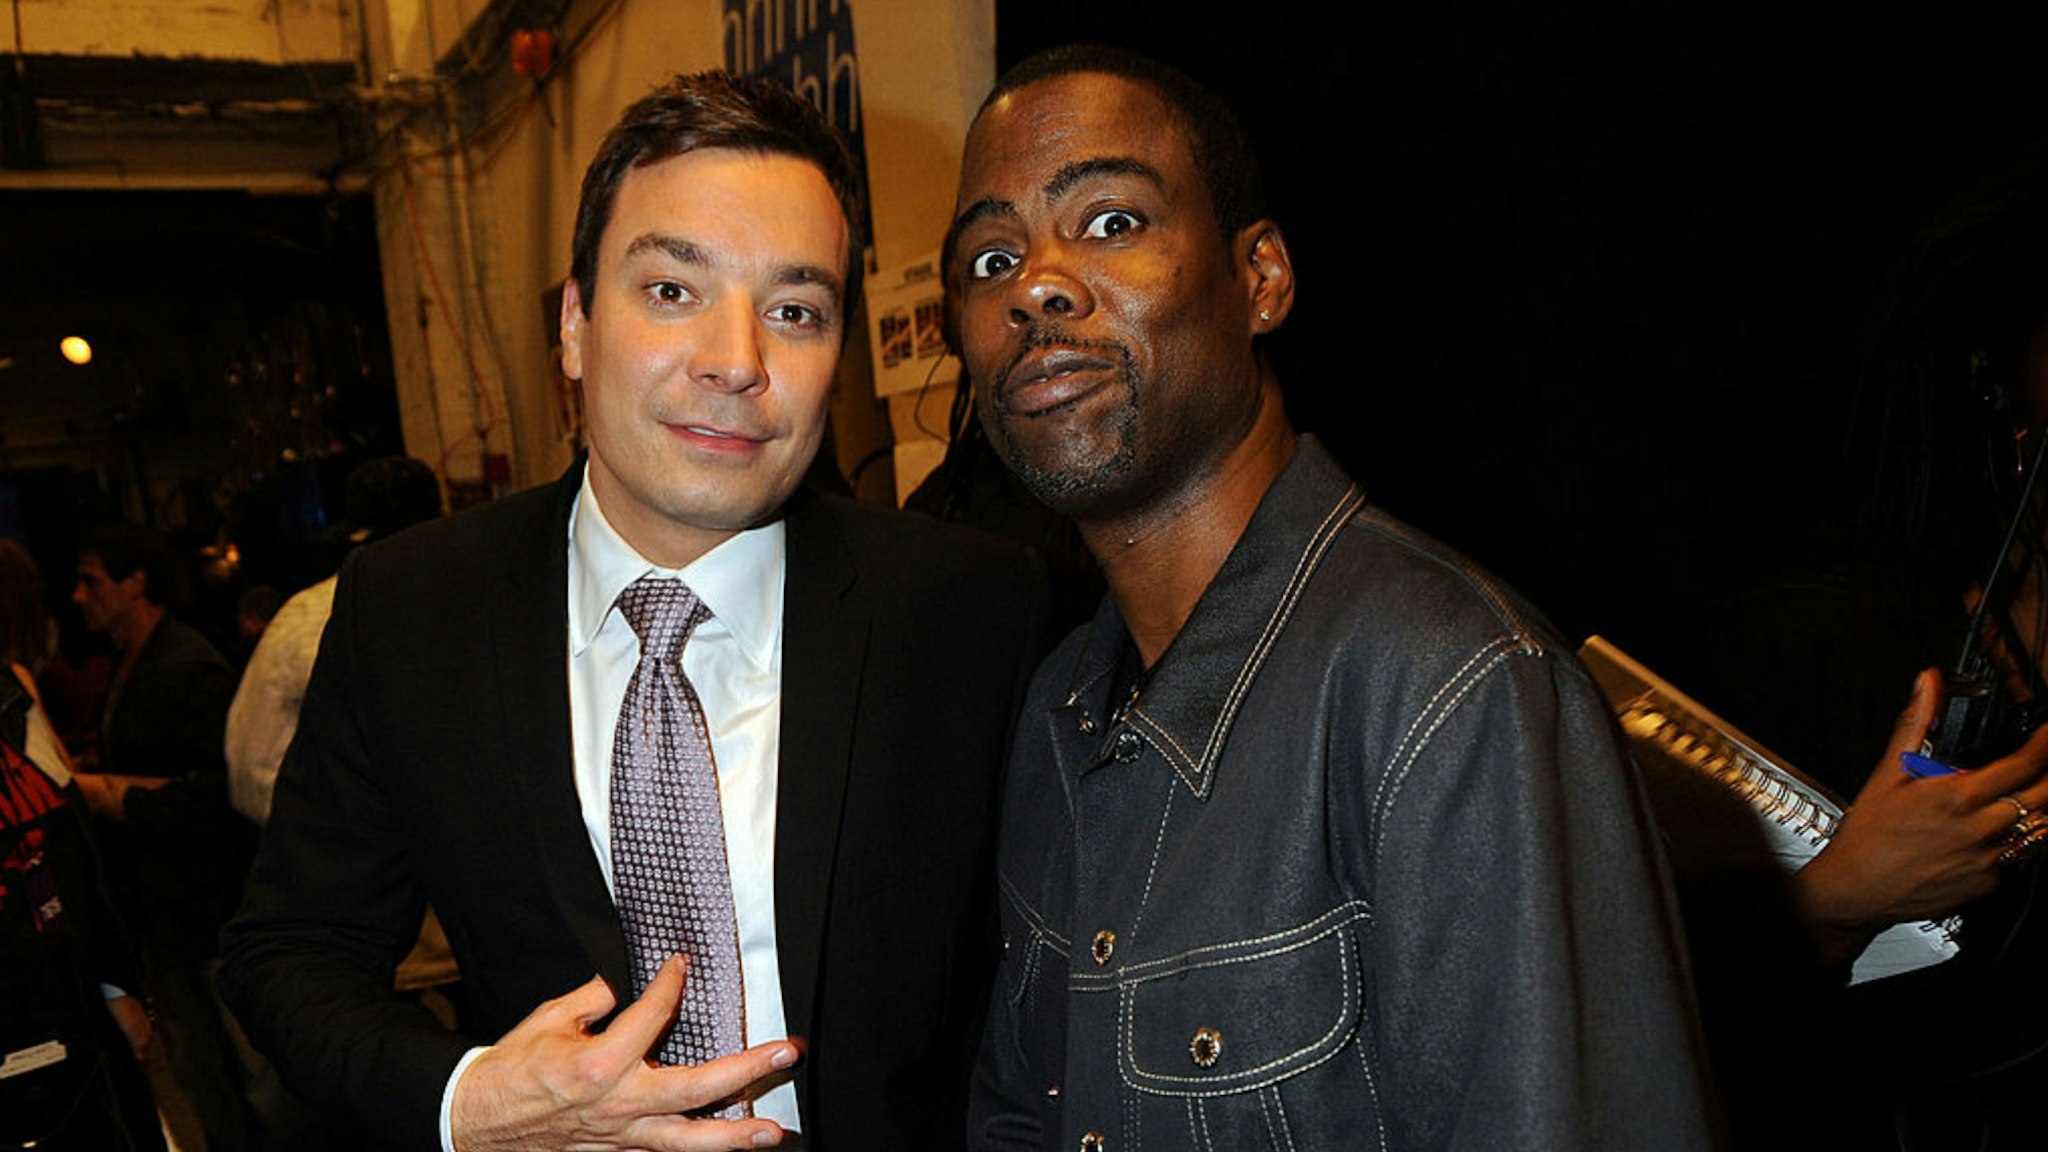 Actors (L-R) Jimmy Fallon and Chris Rock attend the 2009 VH1 Hip Hop Honors at the Brooklyn Academy of Music on September 23, 2009 in the Brooklyn borough of New York City.